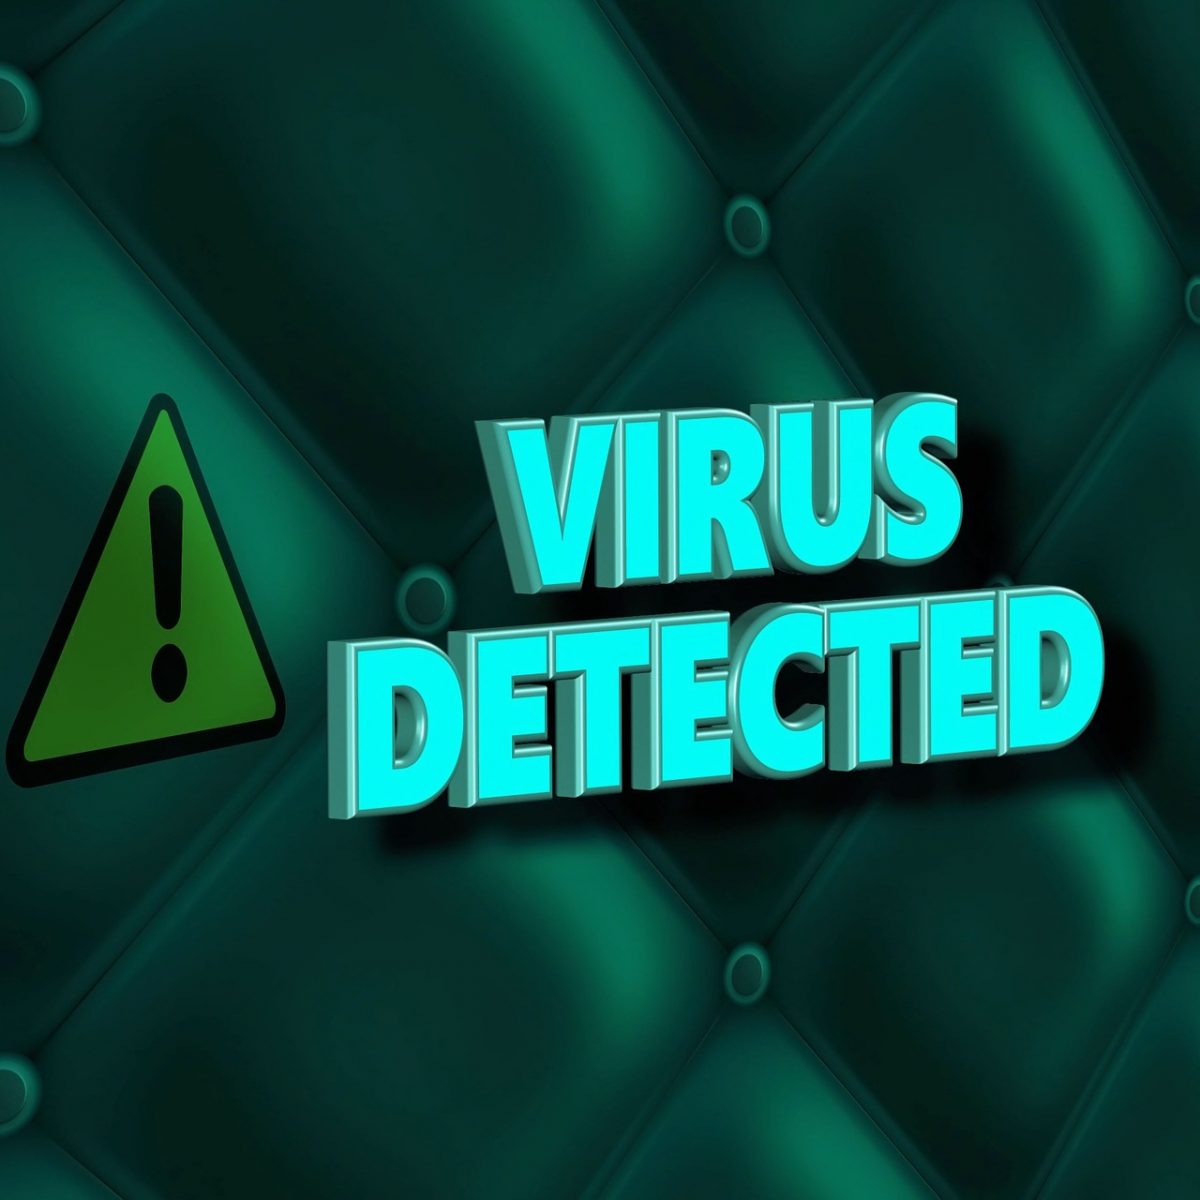 Follow These 6 Crucial Tips to Stay Safe from Virus and Malware